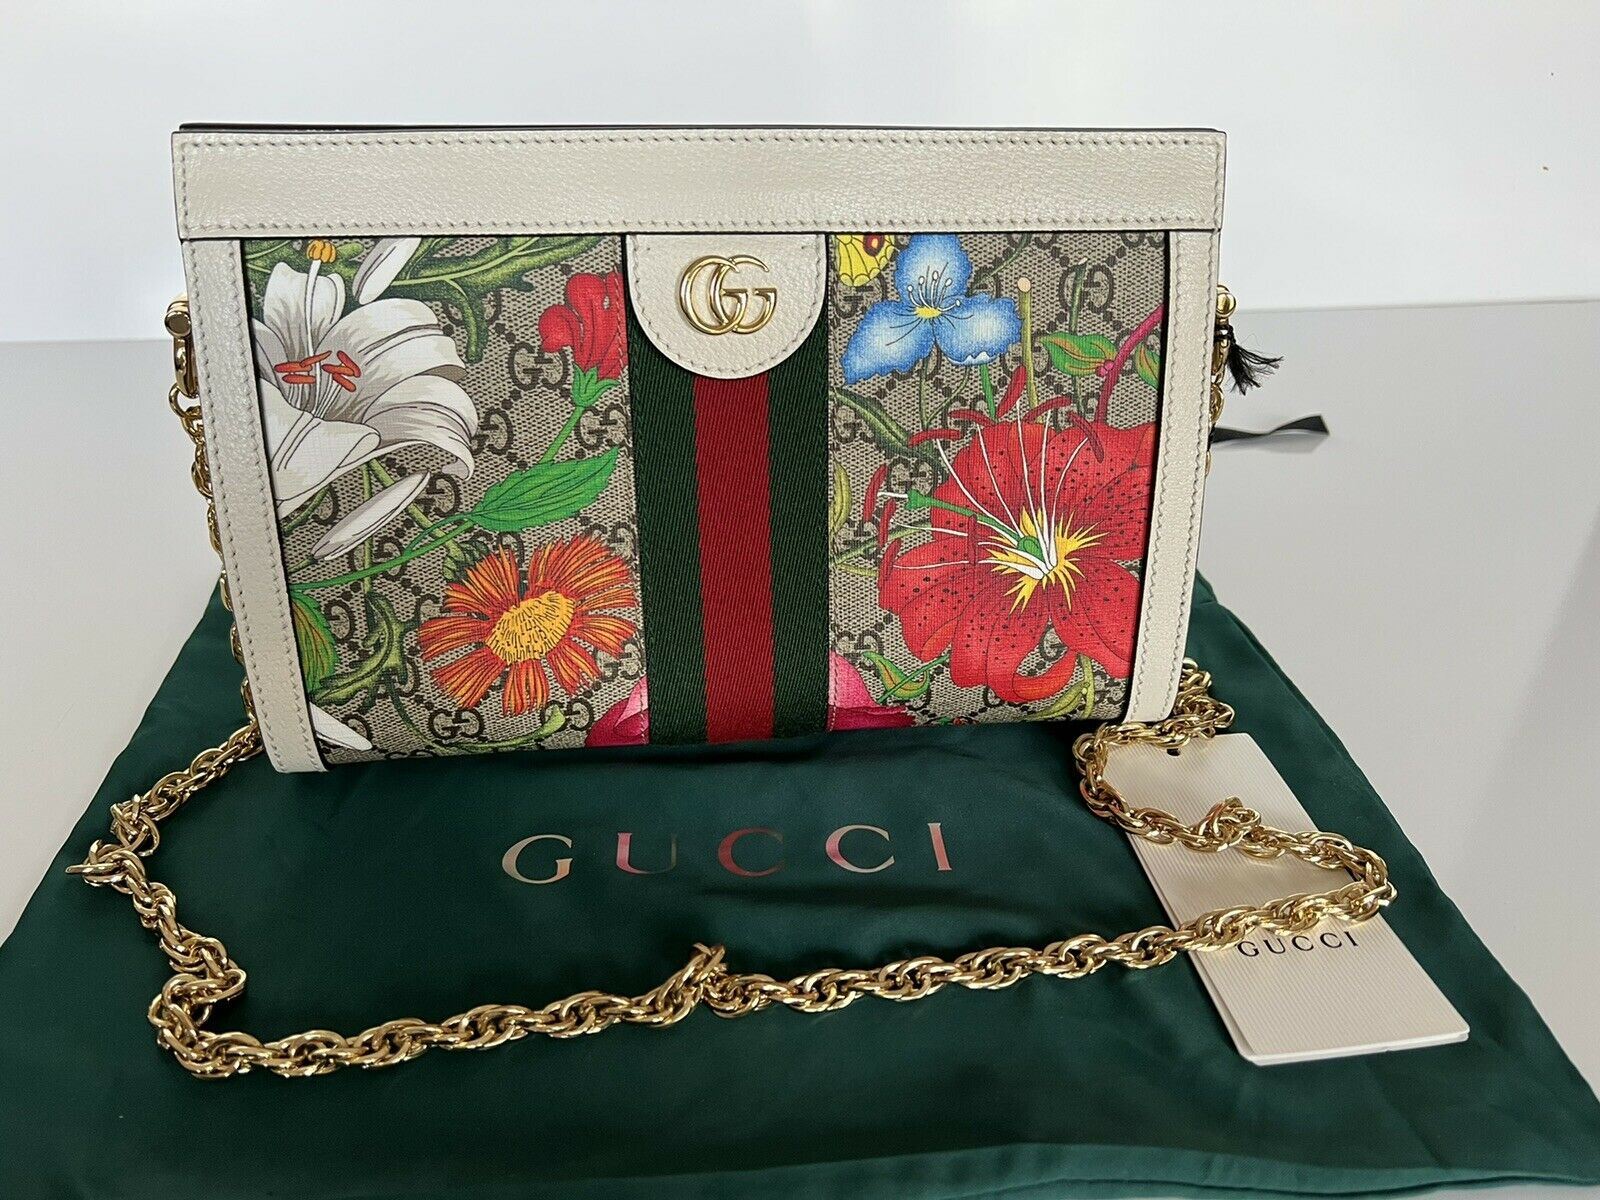 NWT GUCCI GG Supreme Flora Web Small Ophidia Chain Shoulder Bag Italy 503877